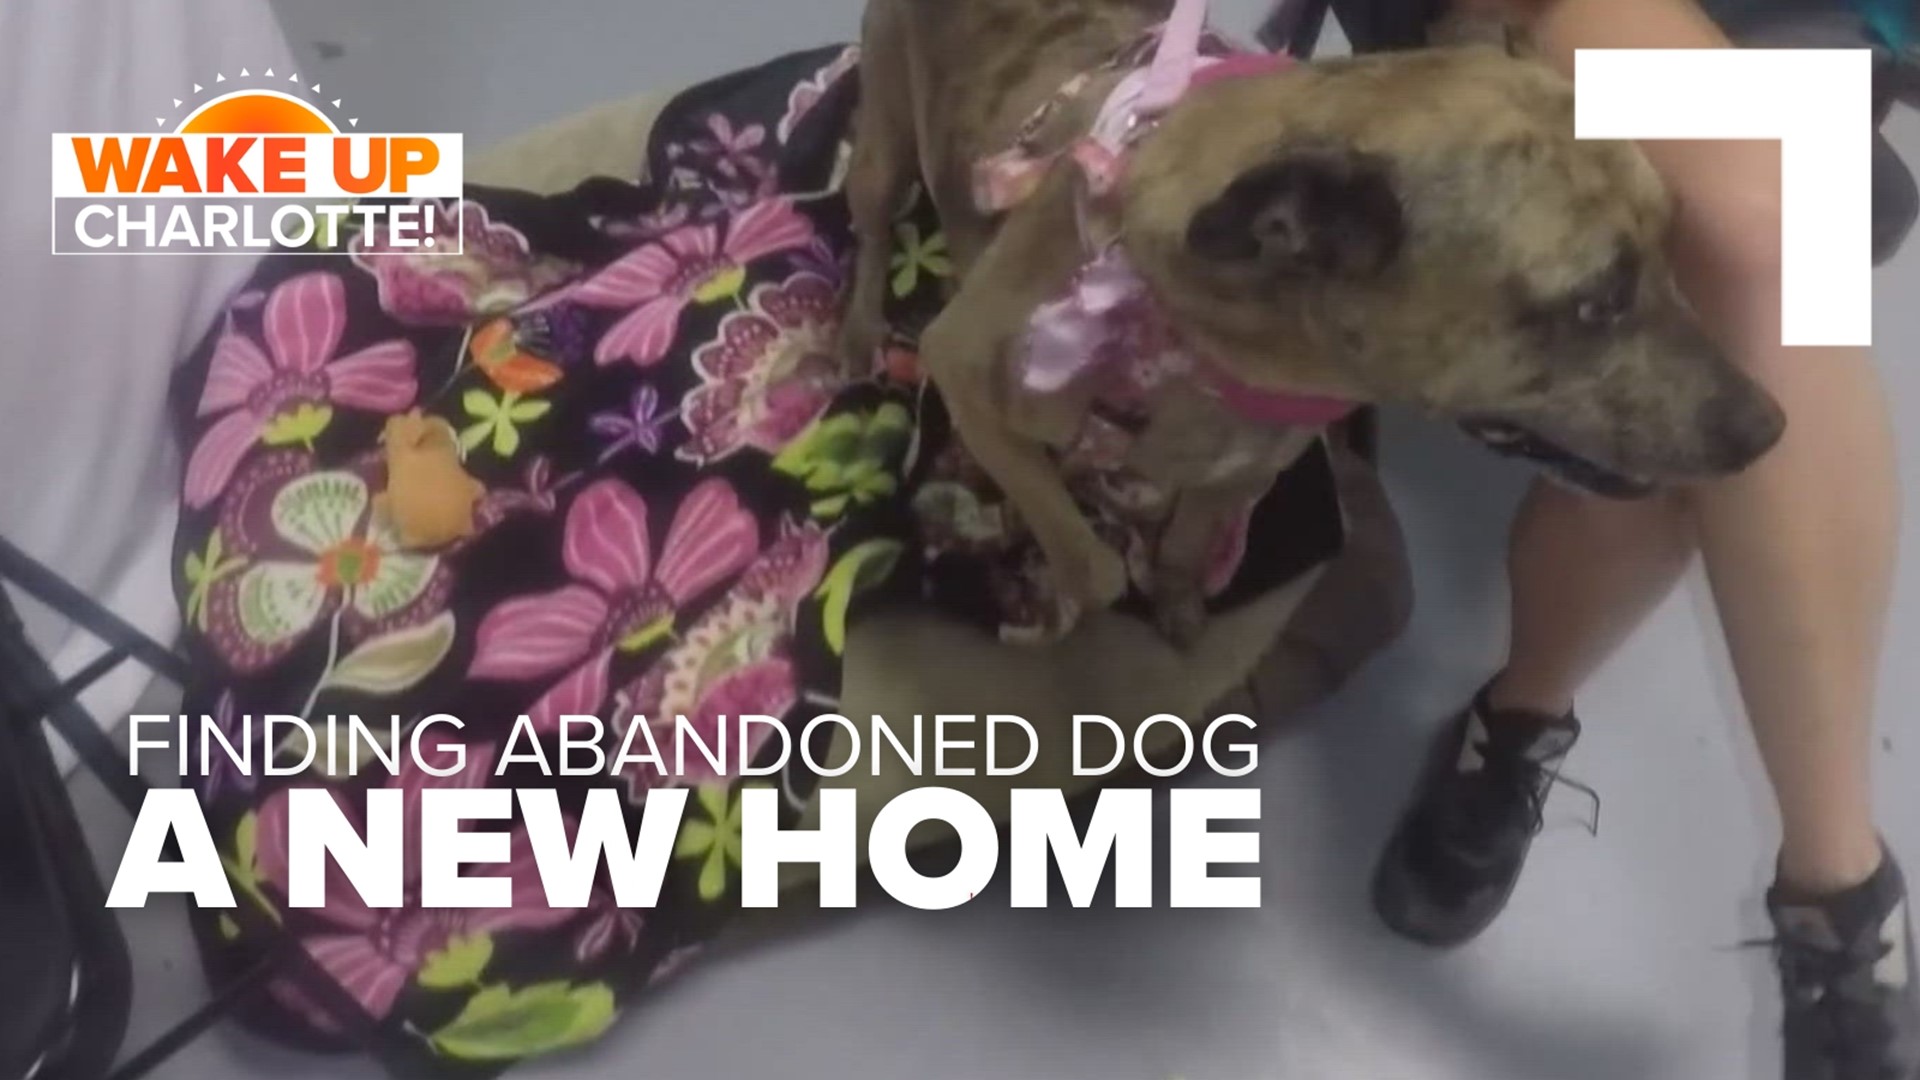 Gatlin was dropped off at the Humane Society of York County in September 2017. Her heartbreaking past has made it hard to find her forever home.